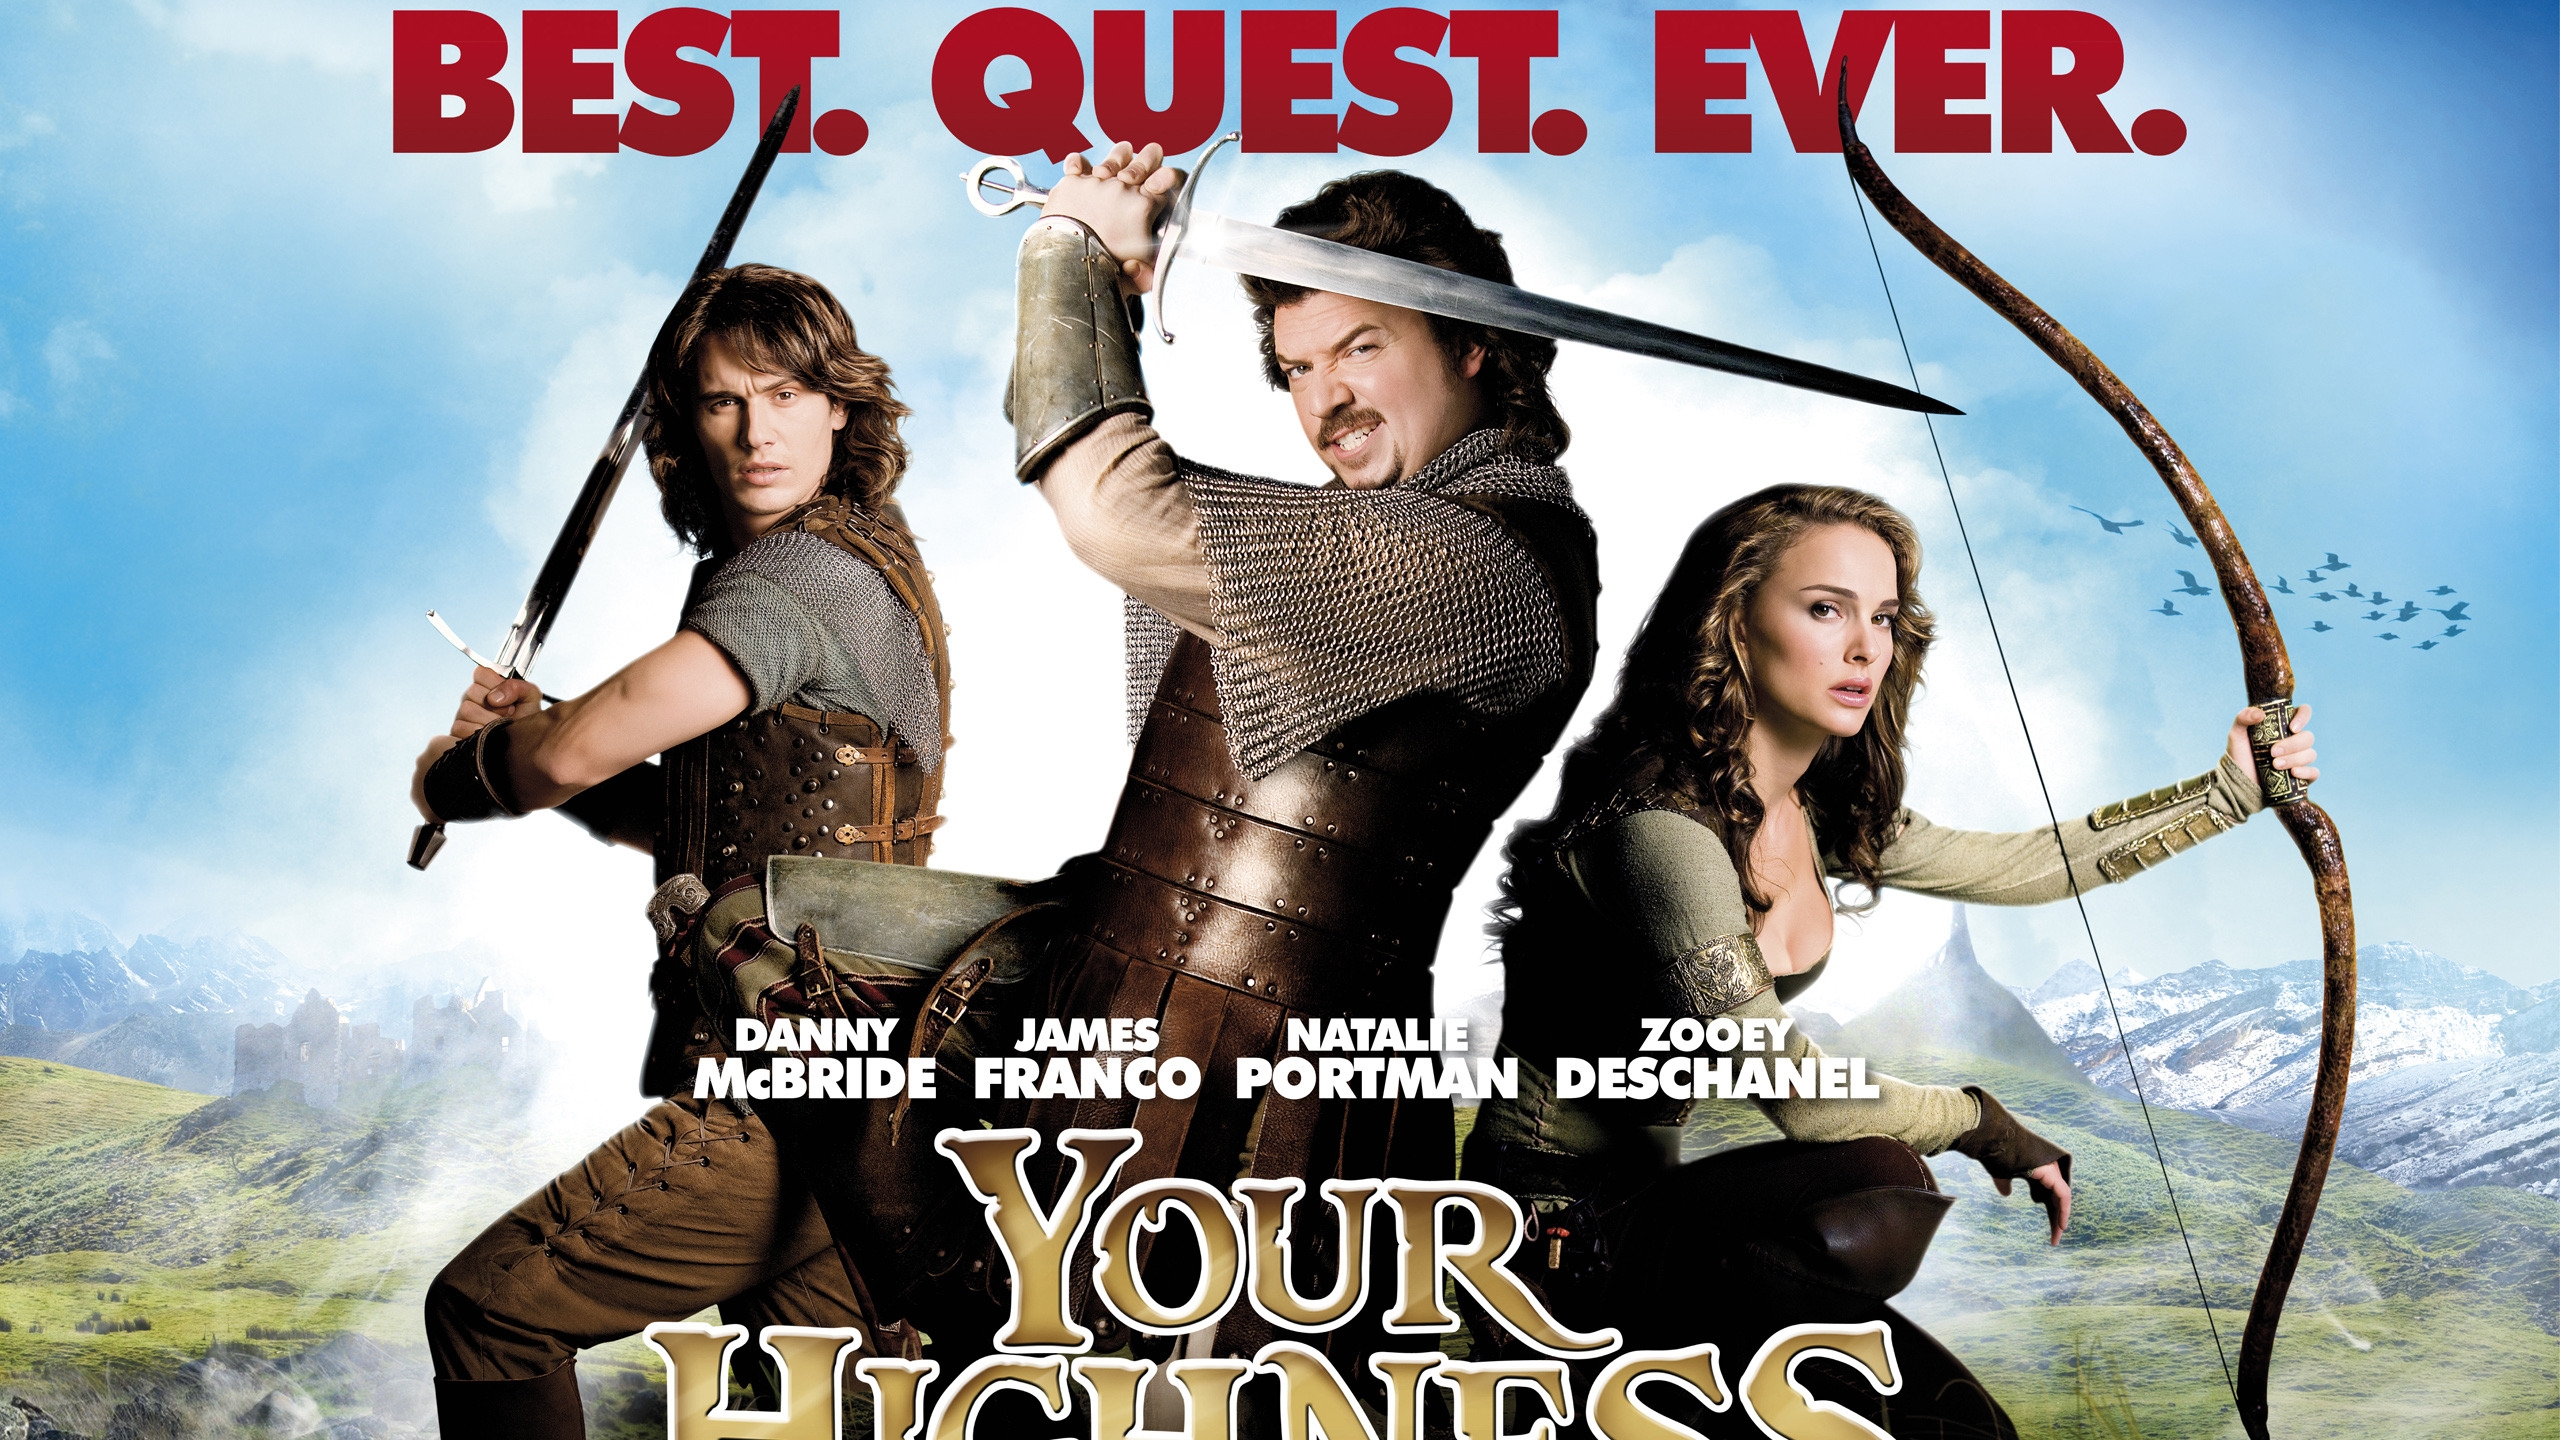 Your Highness Movie for 2560x1440 HDTV resolution